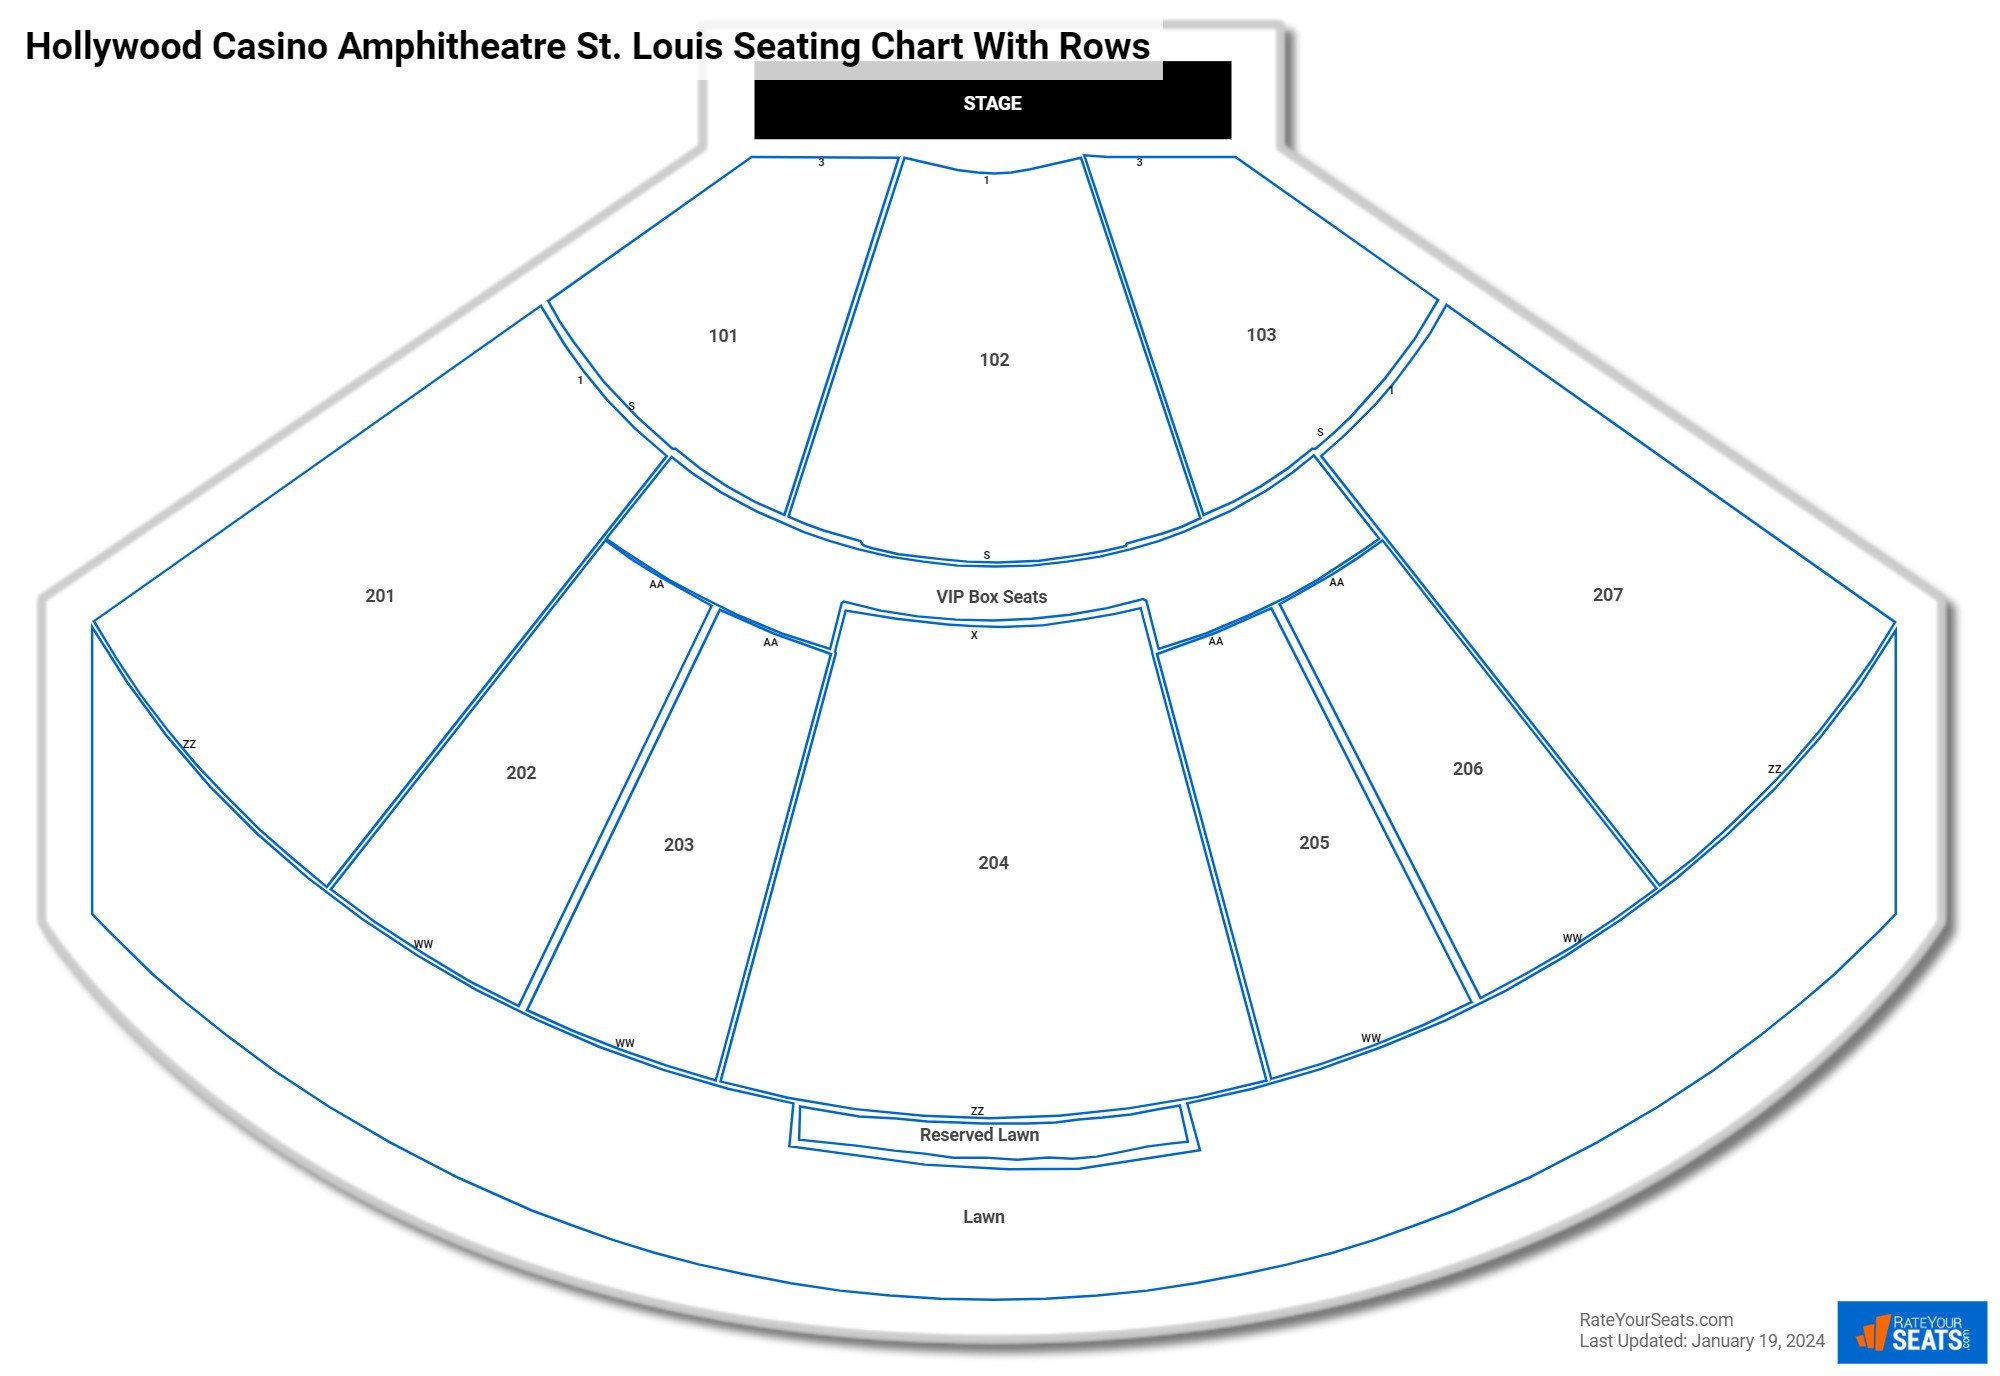 Hollywood Casino Amphitheatre seating chart with row numbers